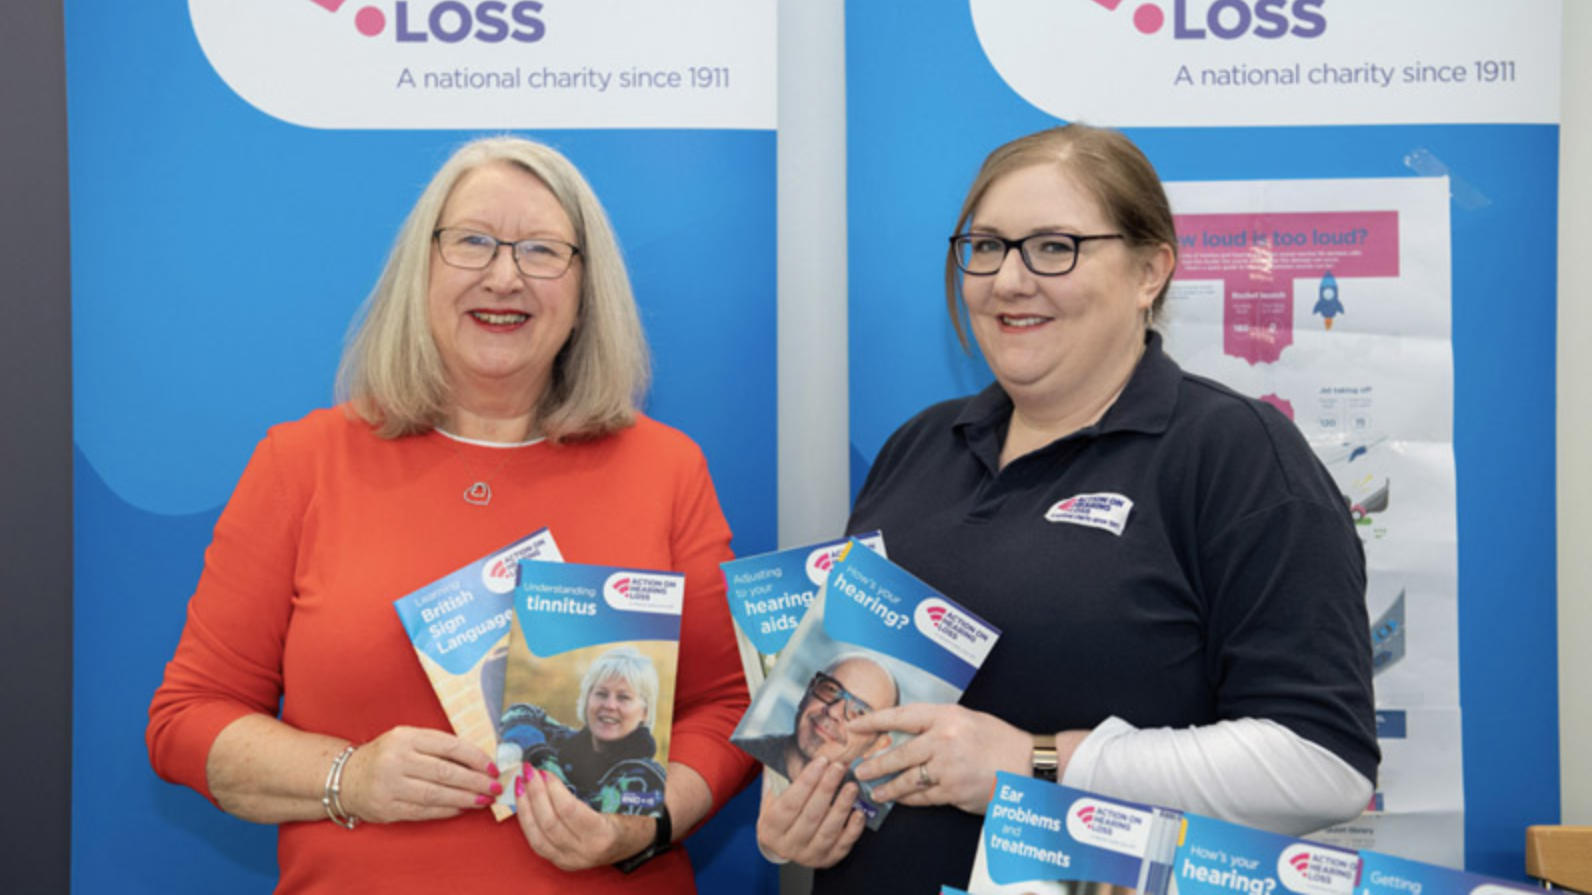 Representatives of Action on Hearing Loss were on the BIGGA stand copy.jpg